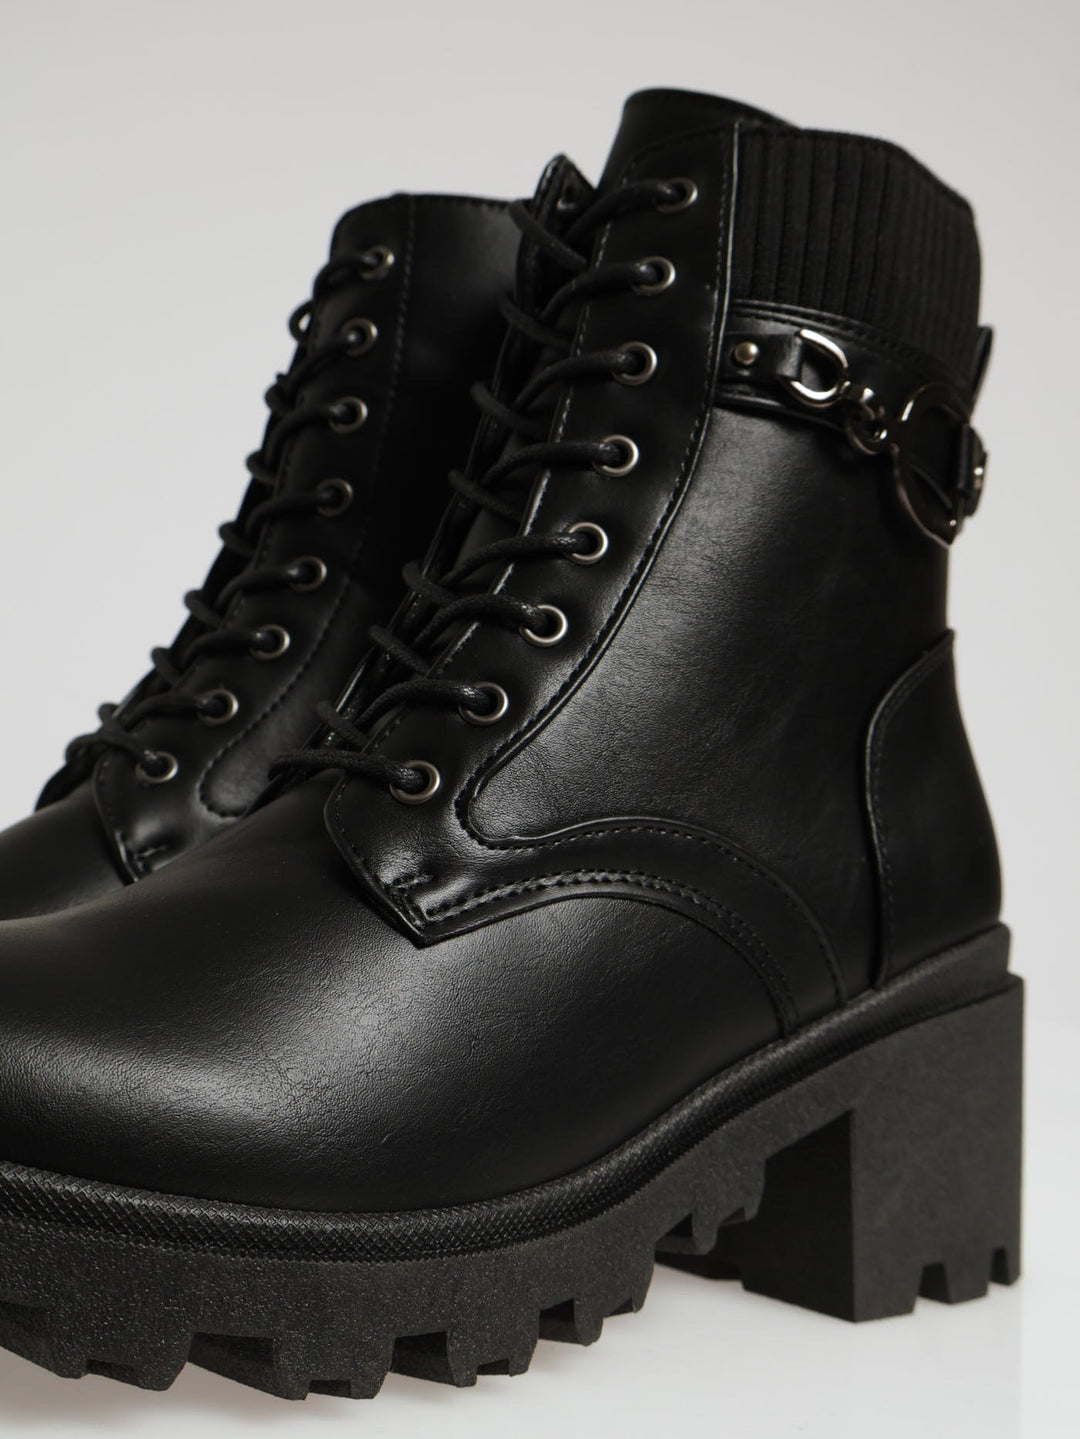 Chunky Military Boot With Sock Detail & Belt Trim - Black